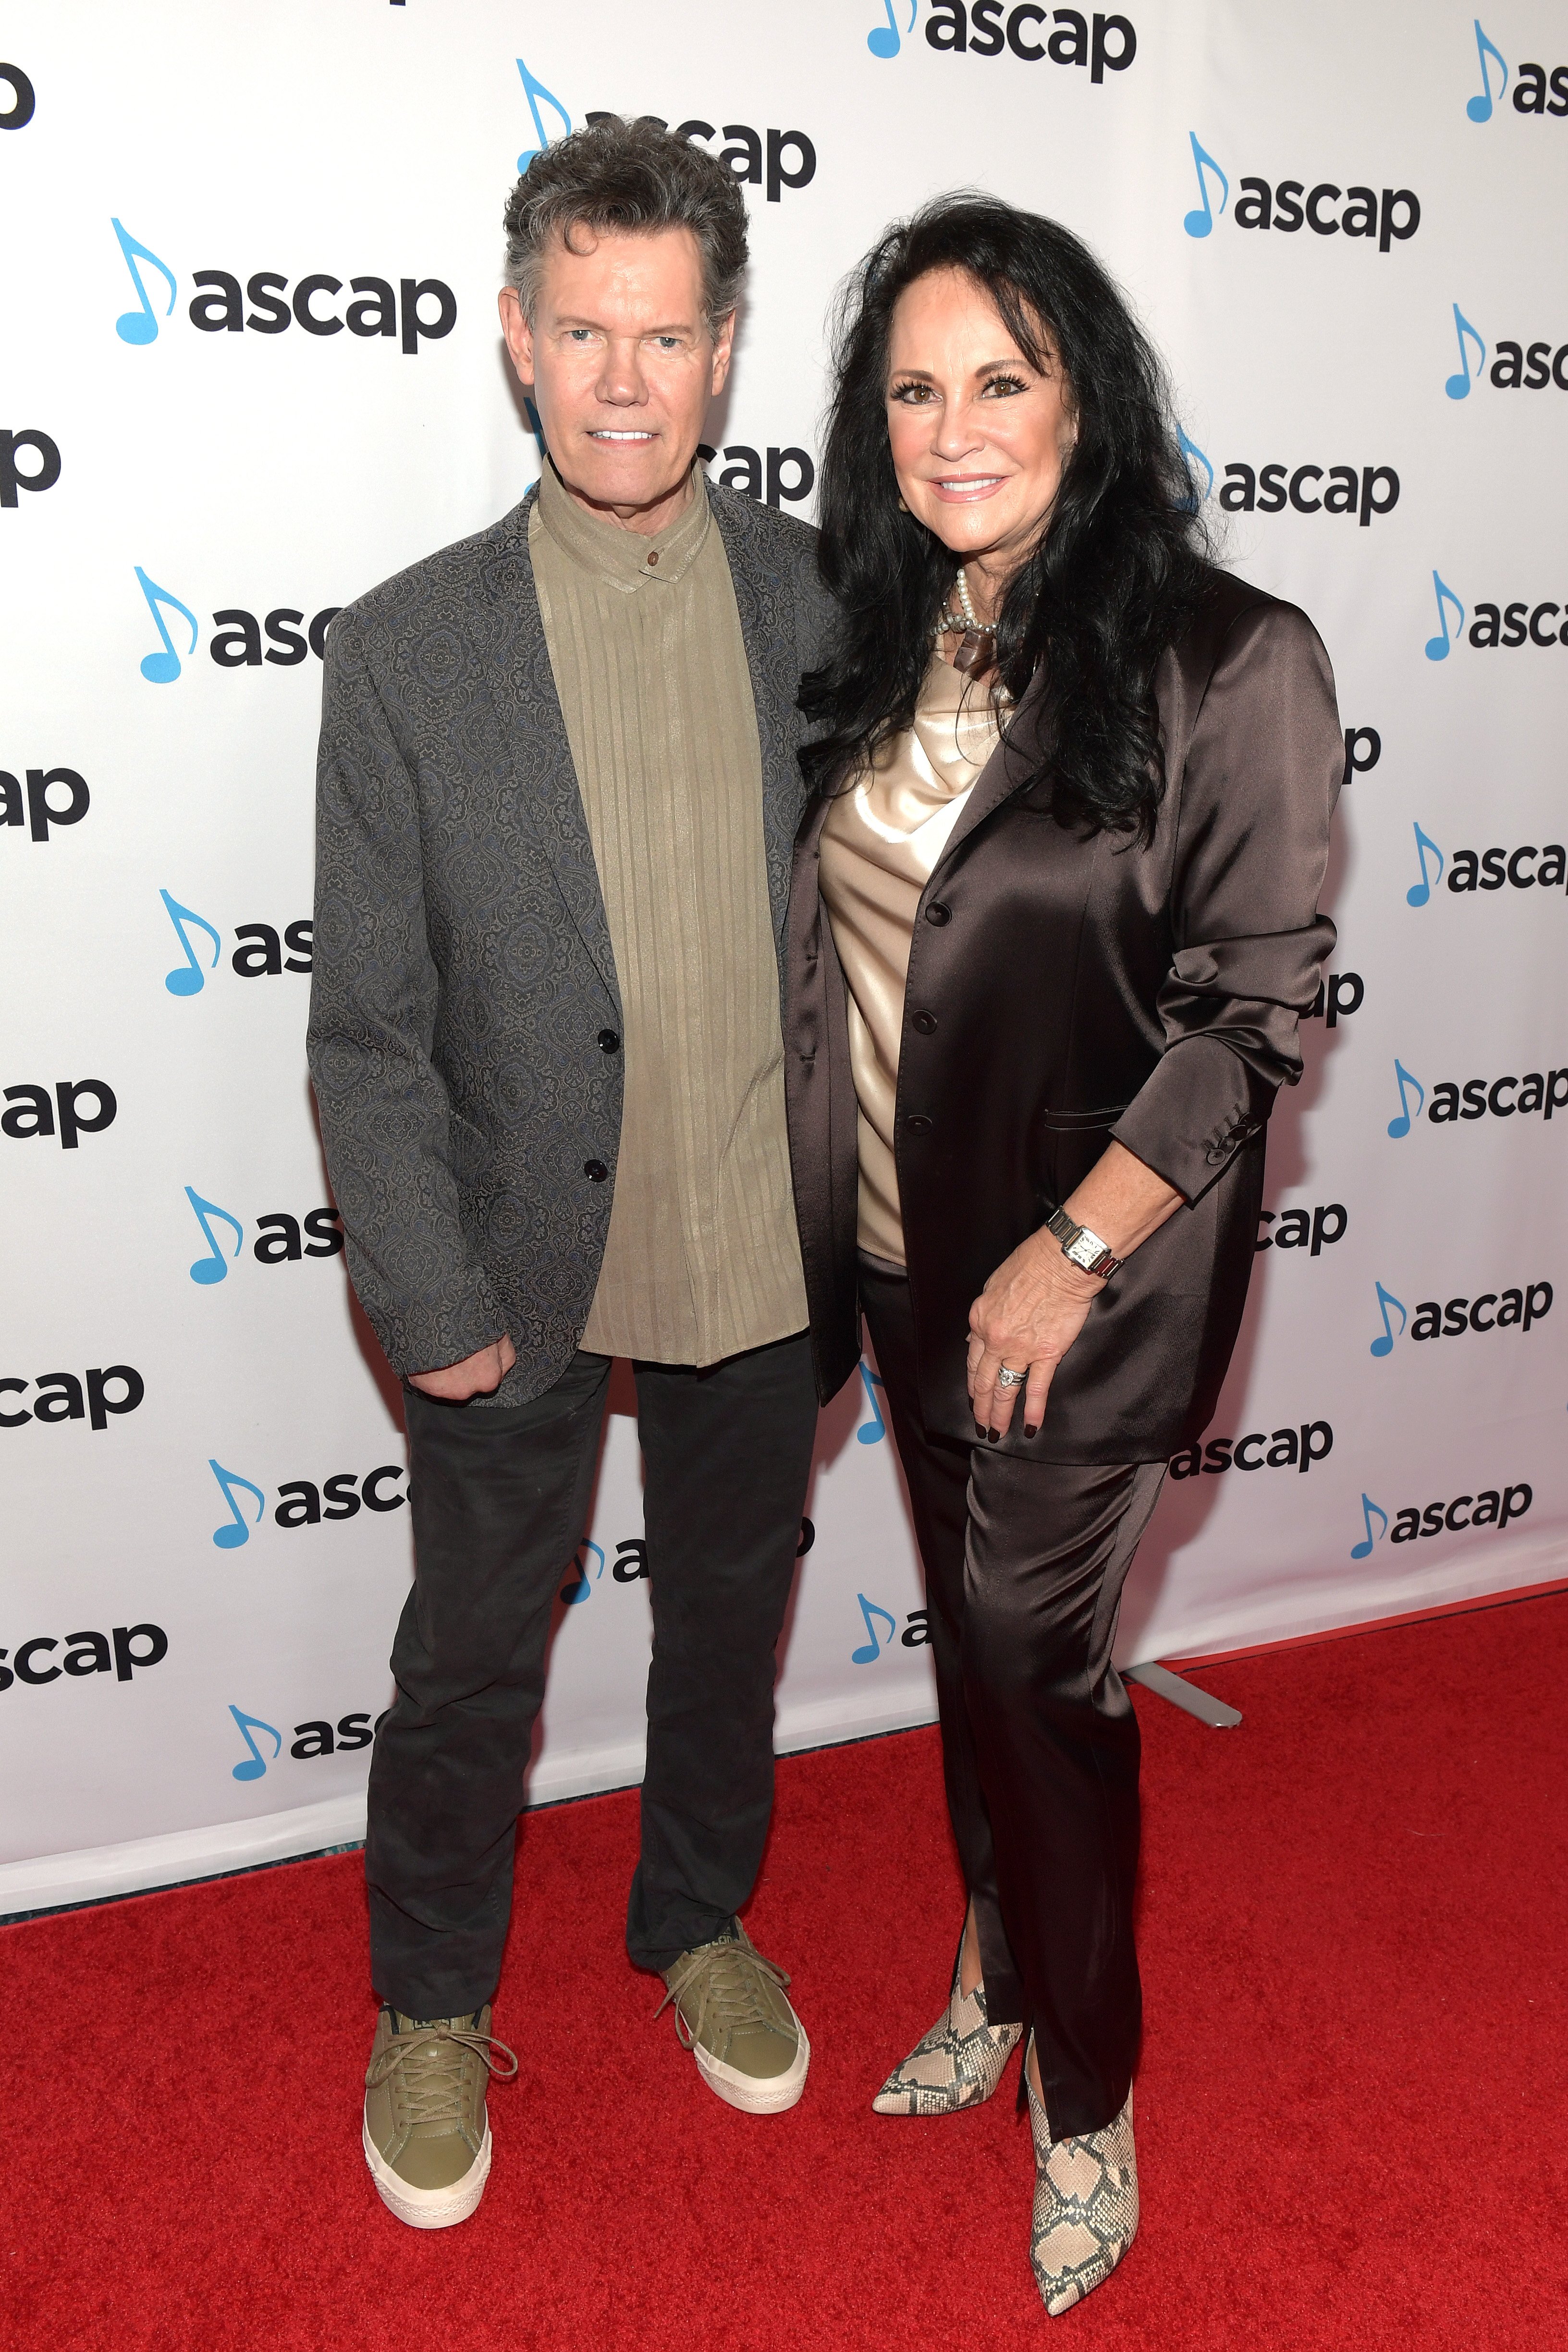 Randy Travis and Mary Beougher at the 57th Annual ASCAP Country Music Awards on November 11, 2019, in Nashville | Source: Getty Images